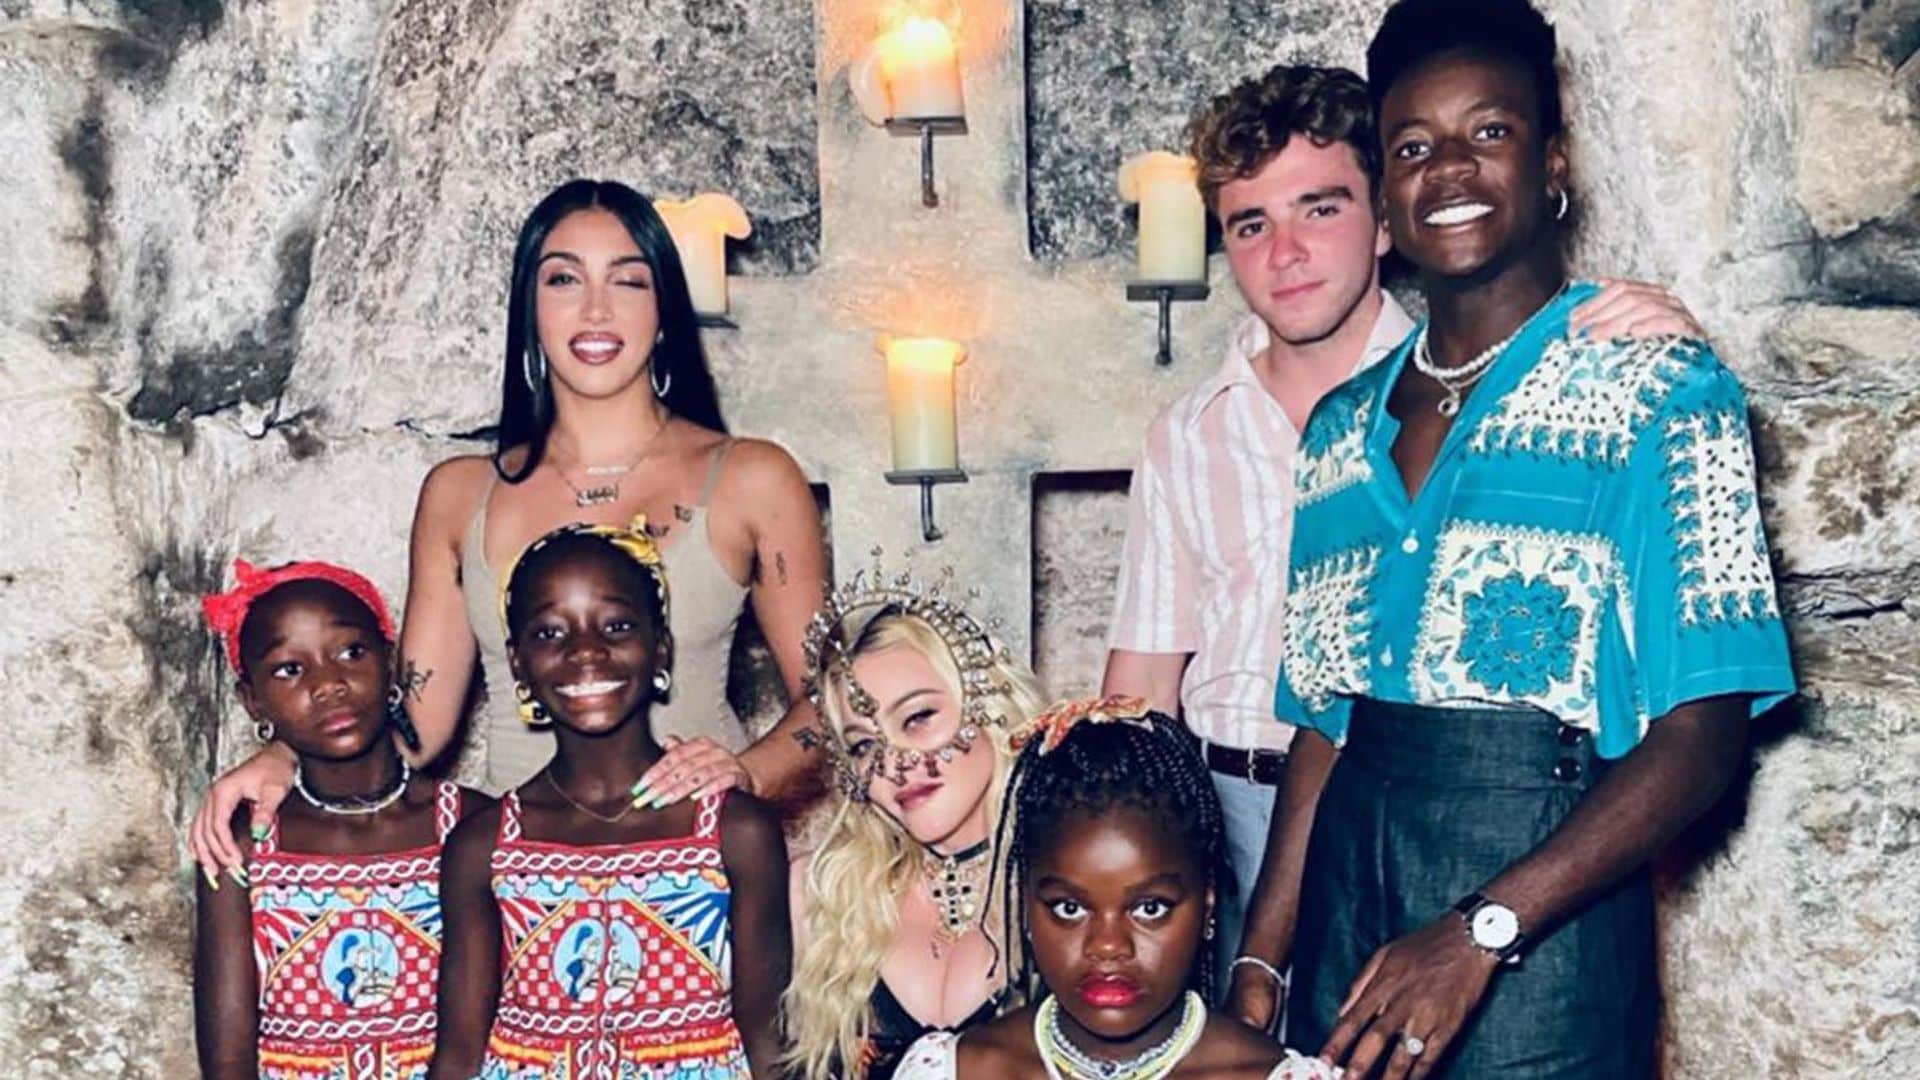 Madonna takes rare pic with all six kids for her 63rd birthday